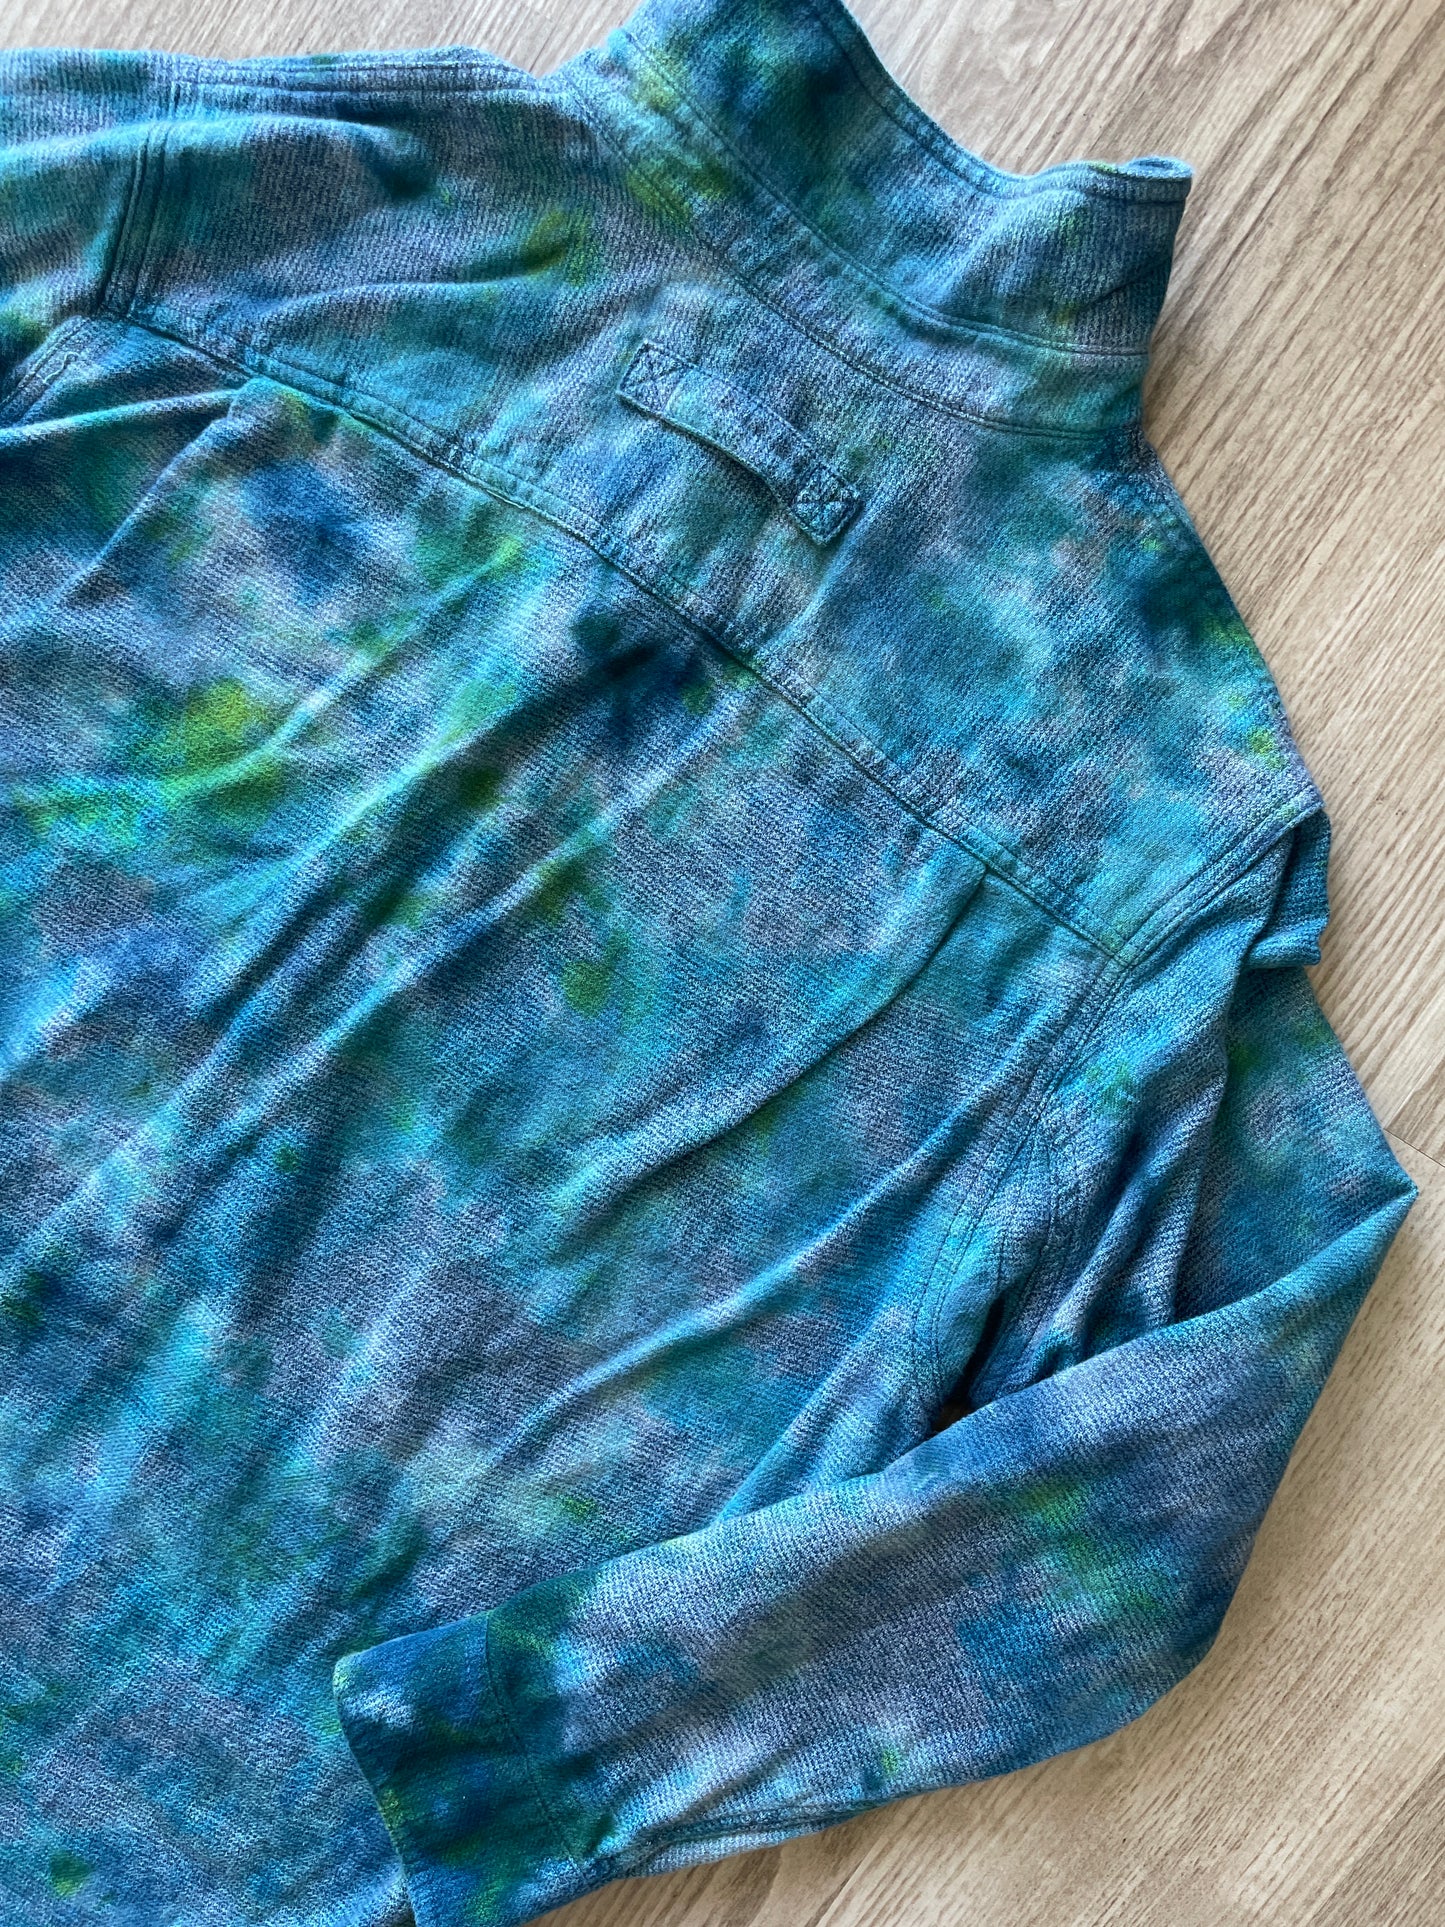 LARGE Men’s Duluth Trading Co Blue and Green Handmade Tie Dye Flannel Shirt | One-Of-a-Kind Upcycled Long Sleeve